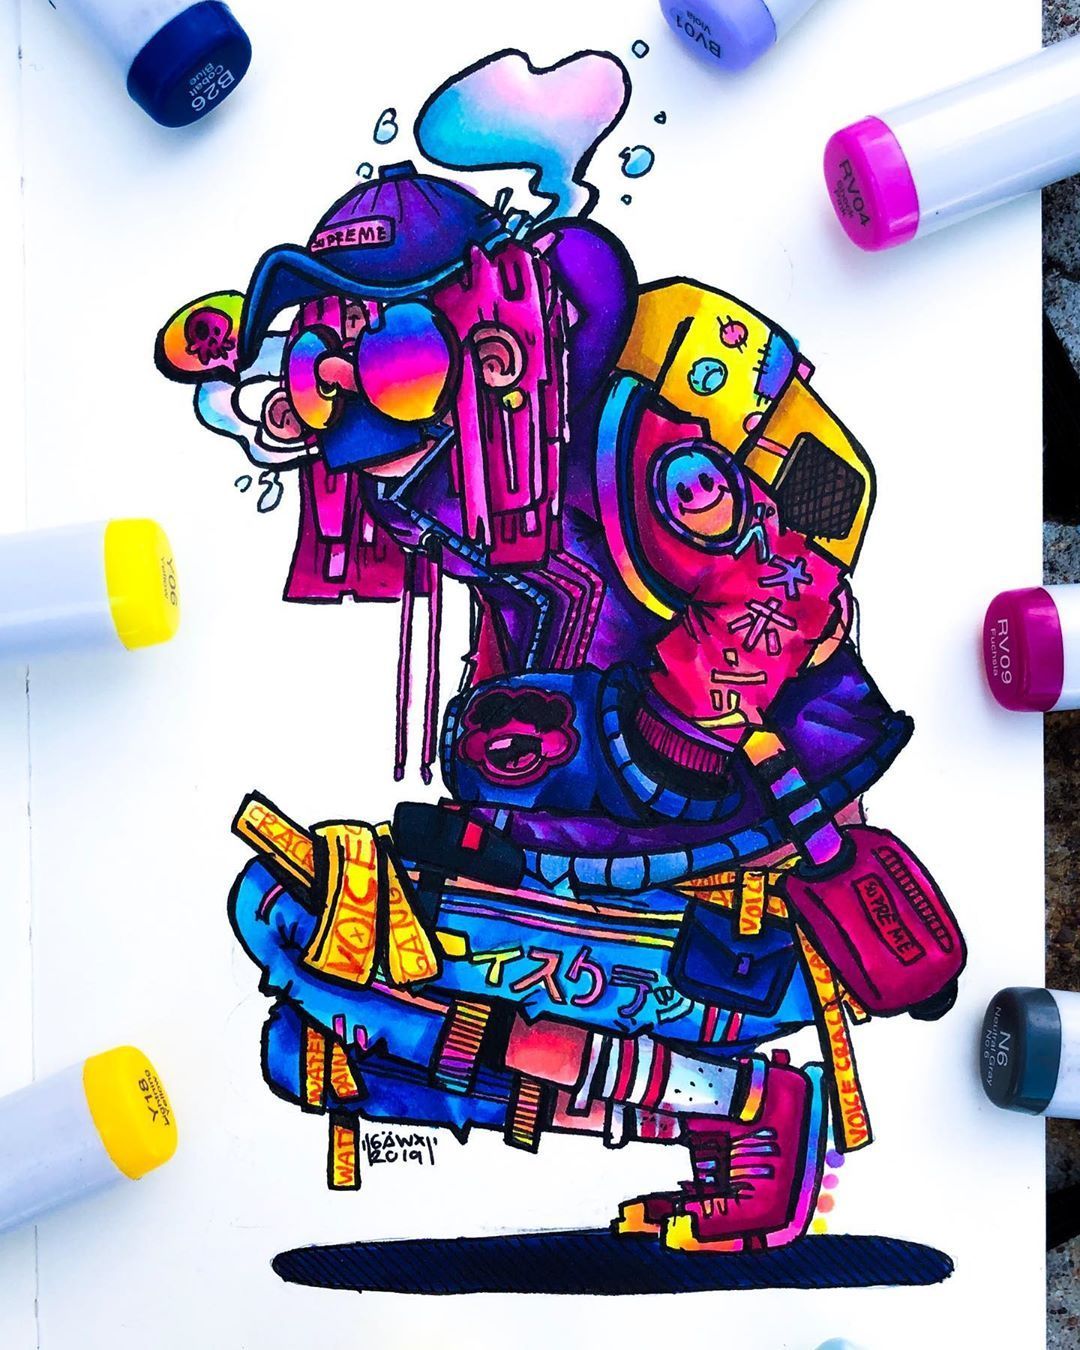 Gawx Art on Instagram: “Just finished this crazy neon character ooof